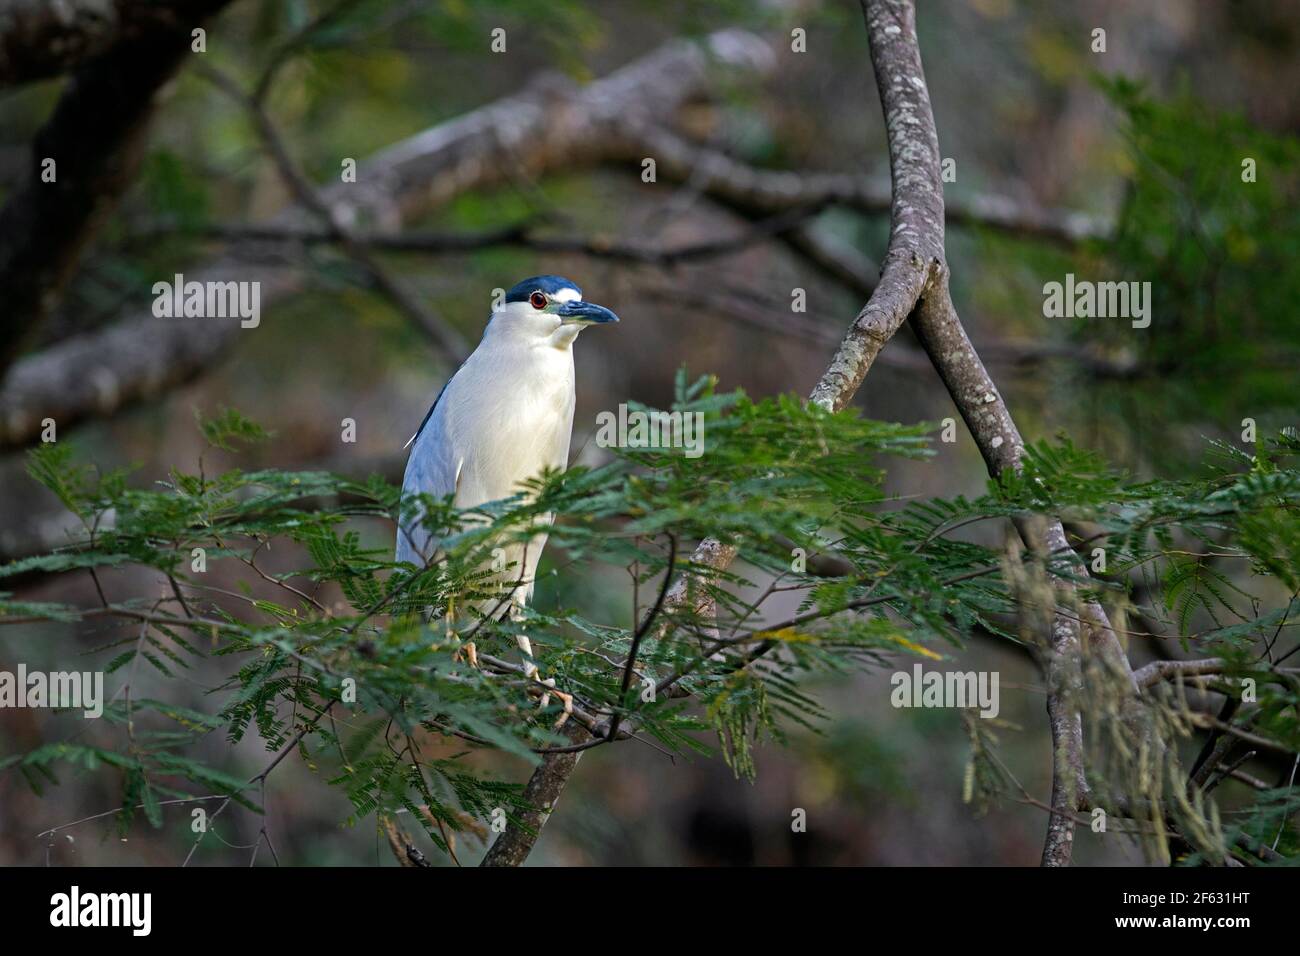 Black-crowned night heron / black-capped night heron (Nycticorax nycticorax) perched in tree in the Sumidero Canyon National Park, Chiapas, Mexico Stock Photo